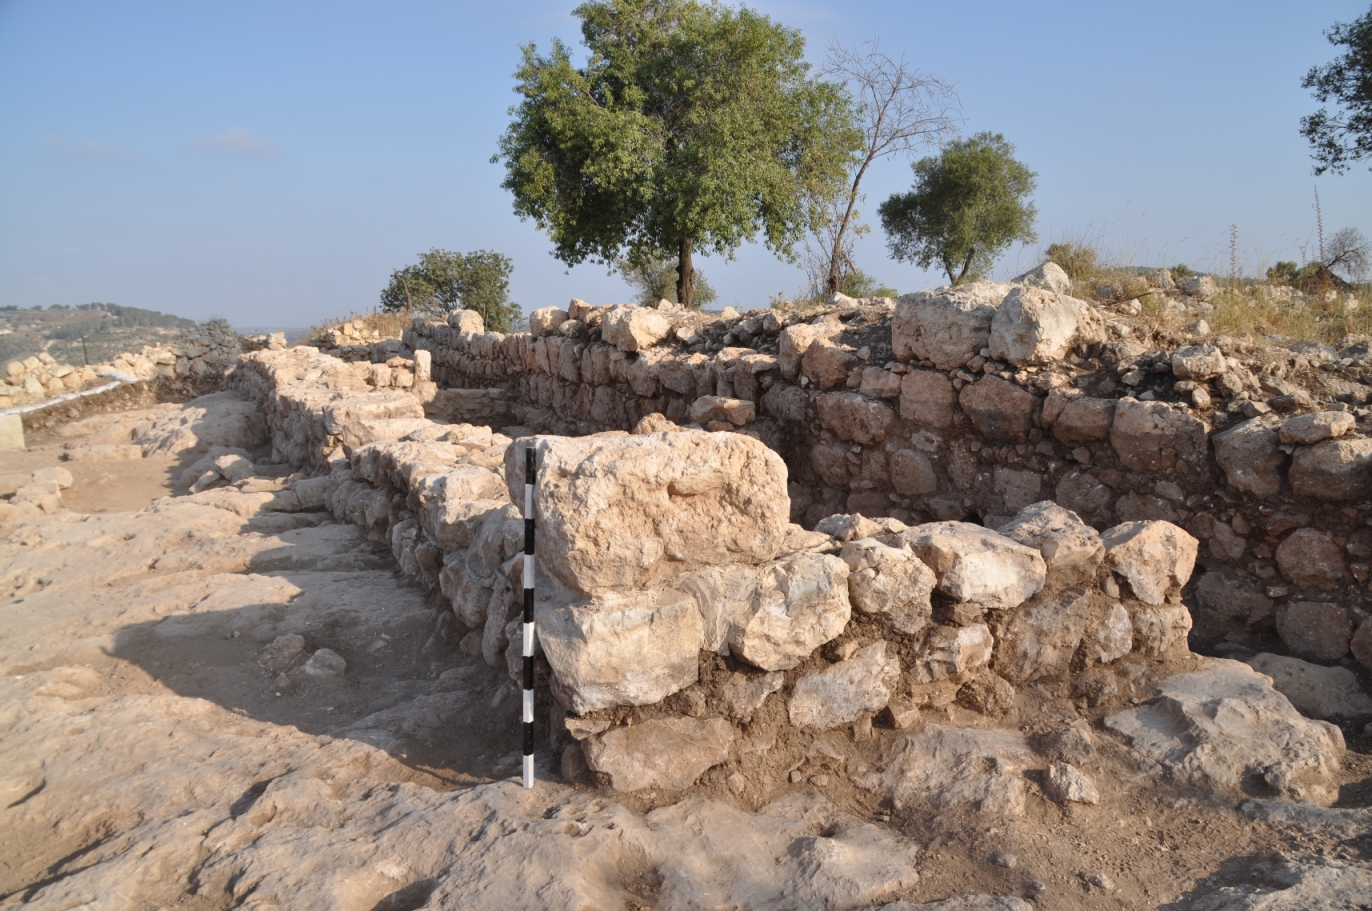 Illustration 5: The remains of a large structure at the head of Khirbet Qeiyafa, the governor’s house, and the location of the Judahite bureaucracy and administration in the Shfela lowlands (Photo courtesy of the excavation expedition)